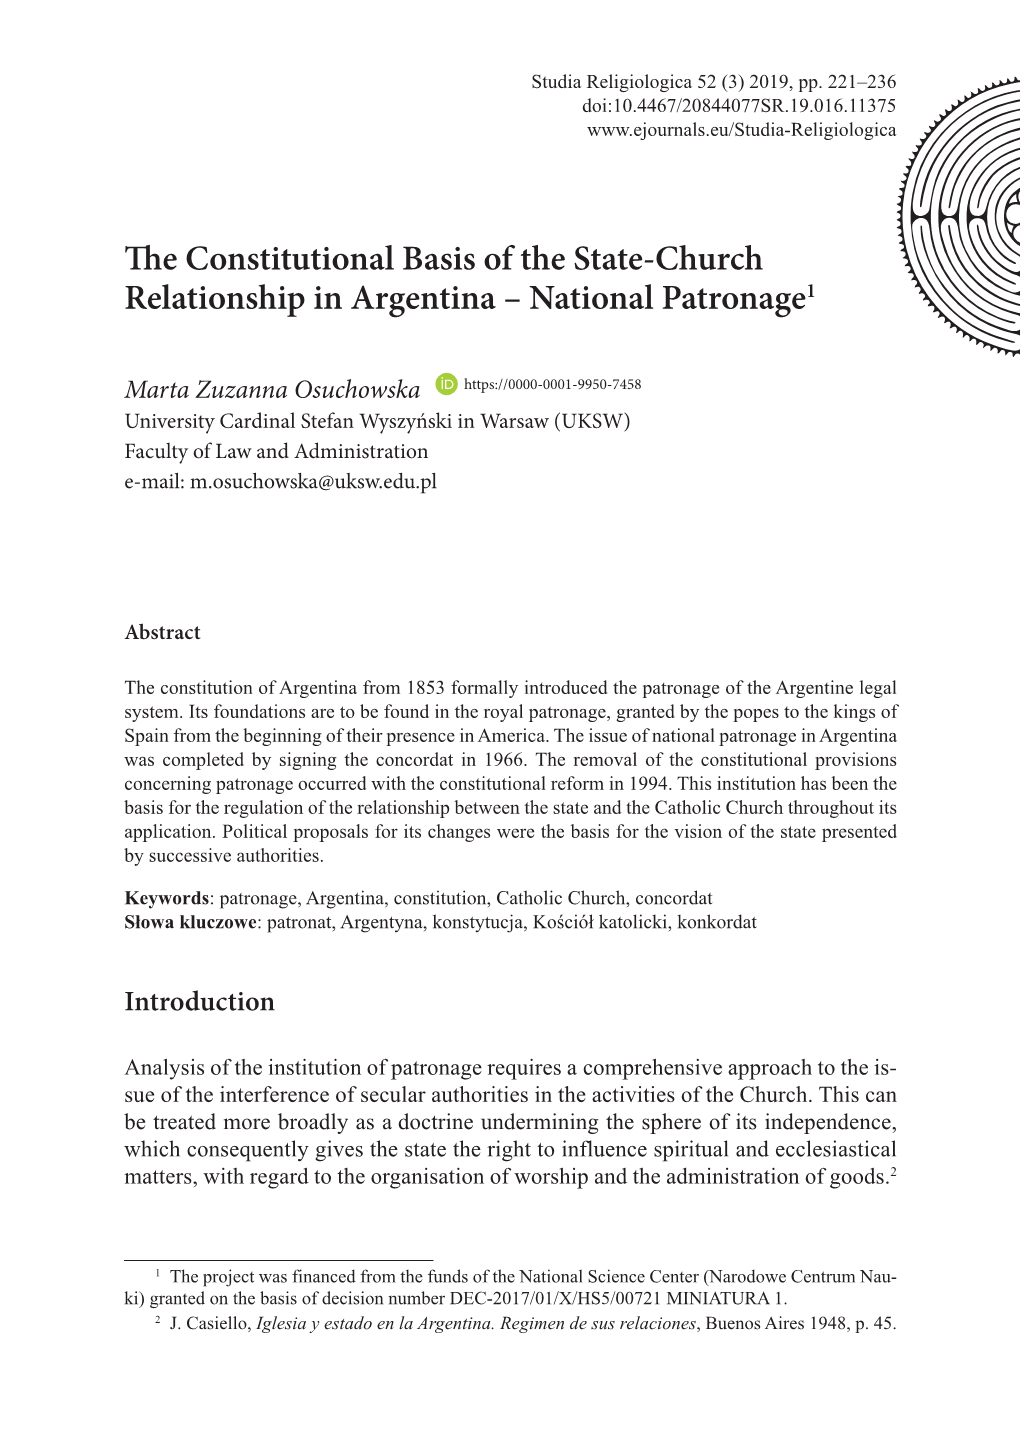 The Constitutional Basis of the State-Church Relationship in Argentina – National Patronage1